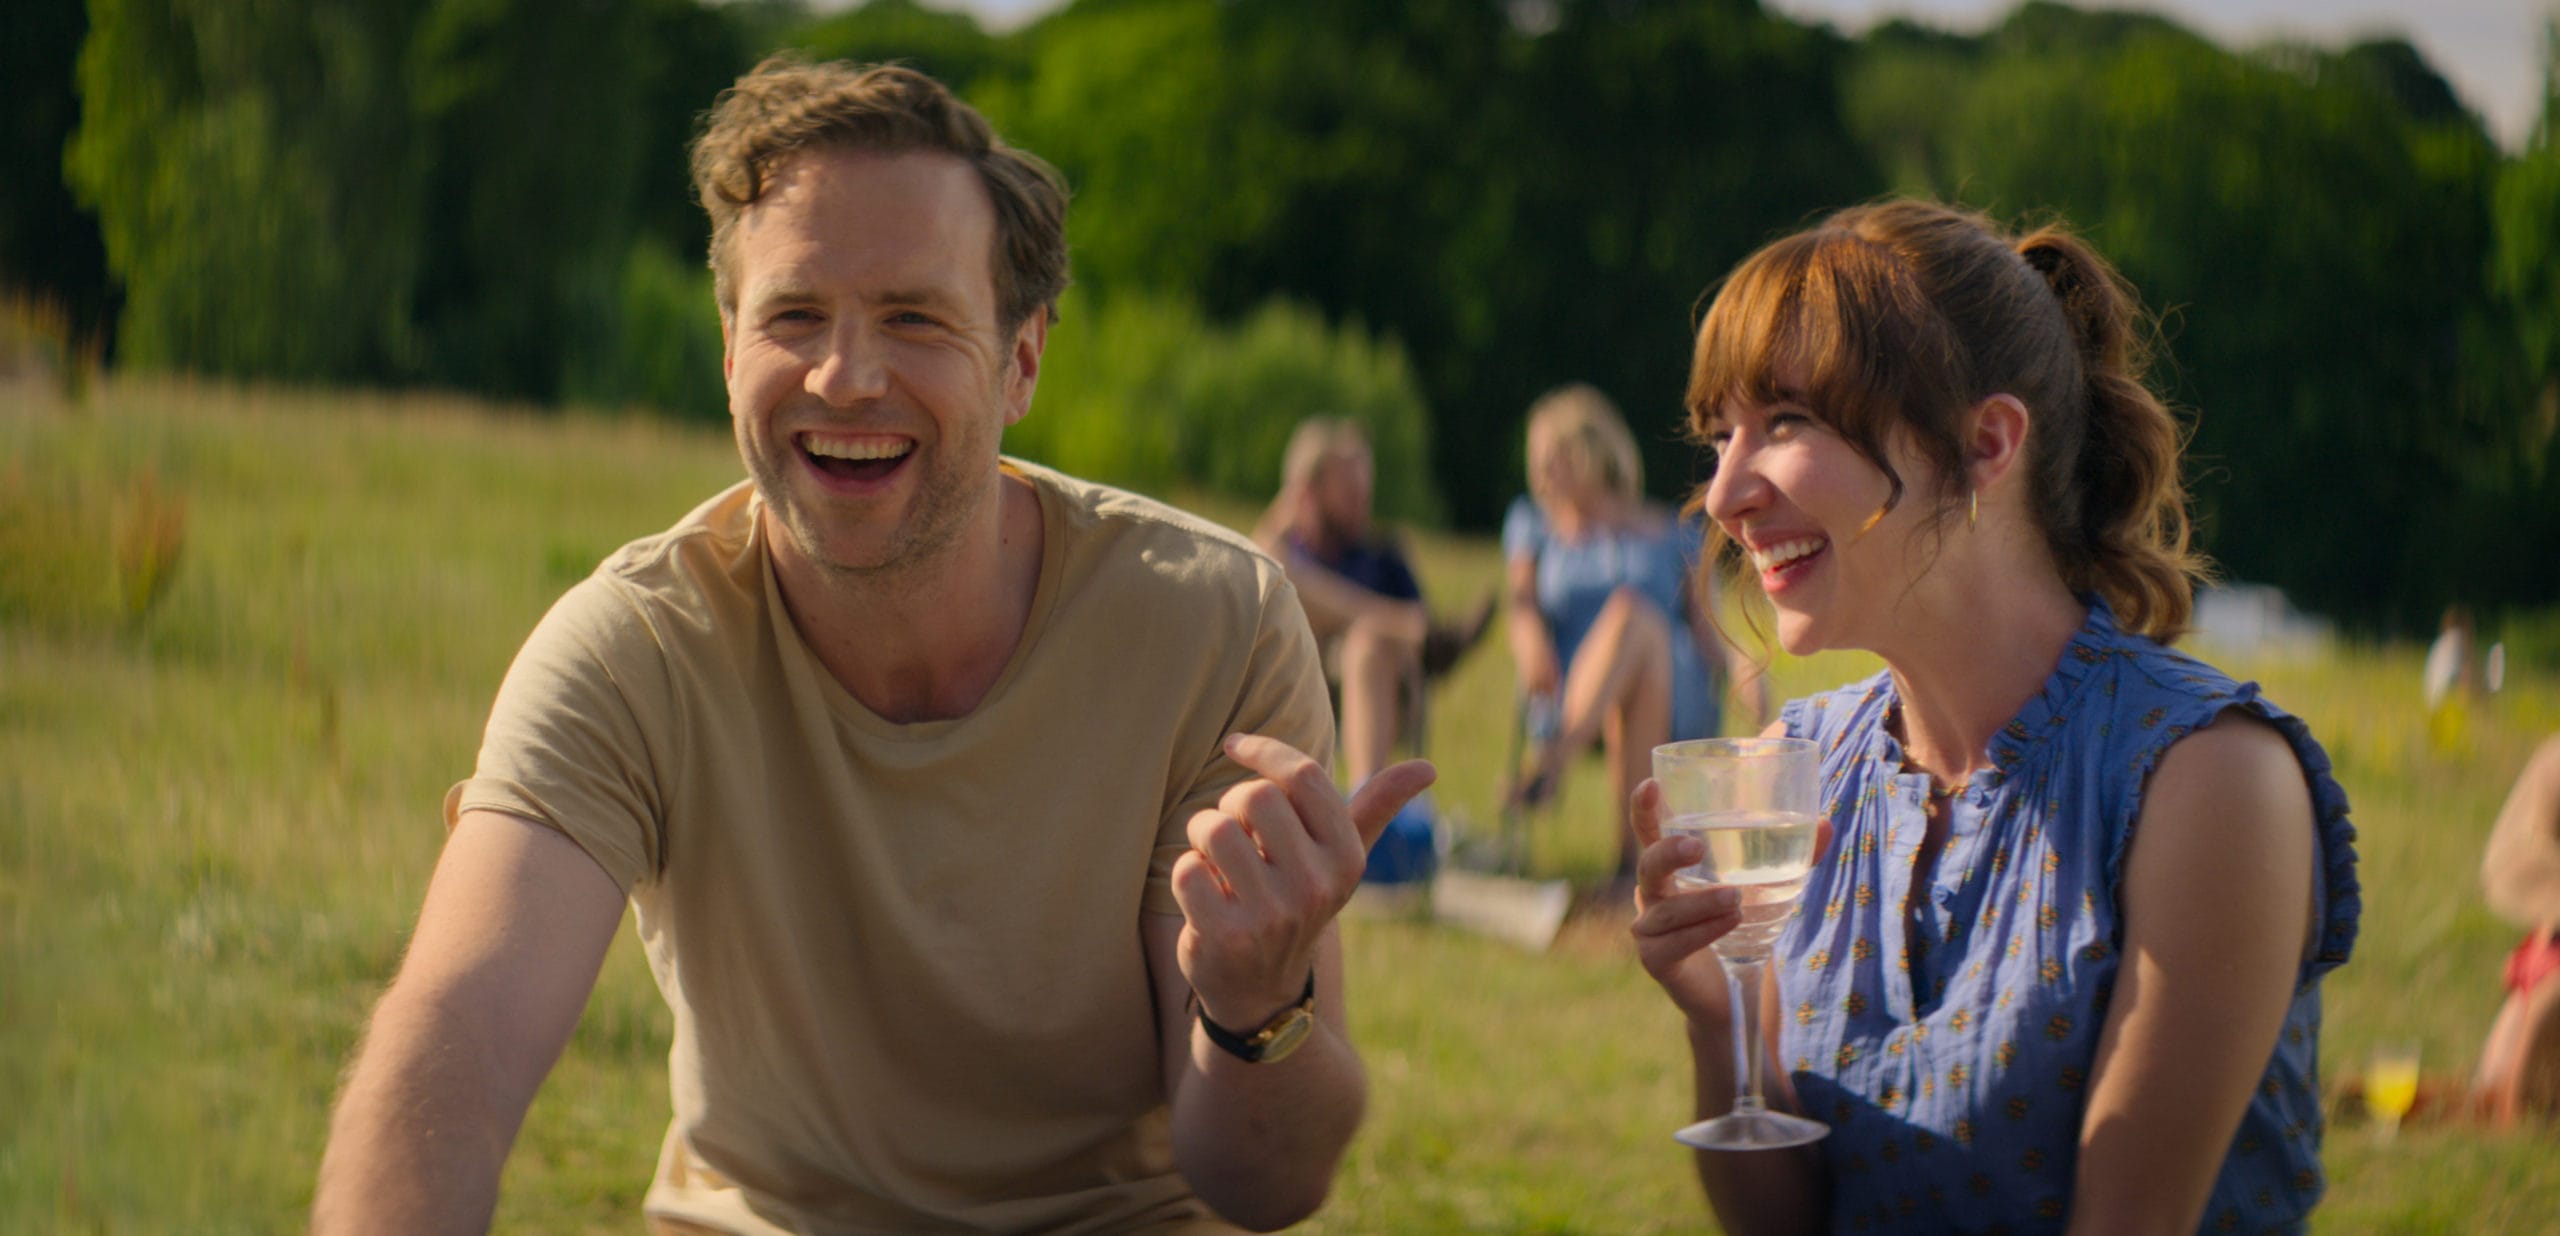 Rafe Spall and Esther Smith play parents who don't deserve children in Apple TV+'s new series <em>Trying</em>.